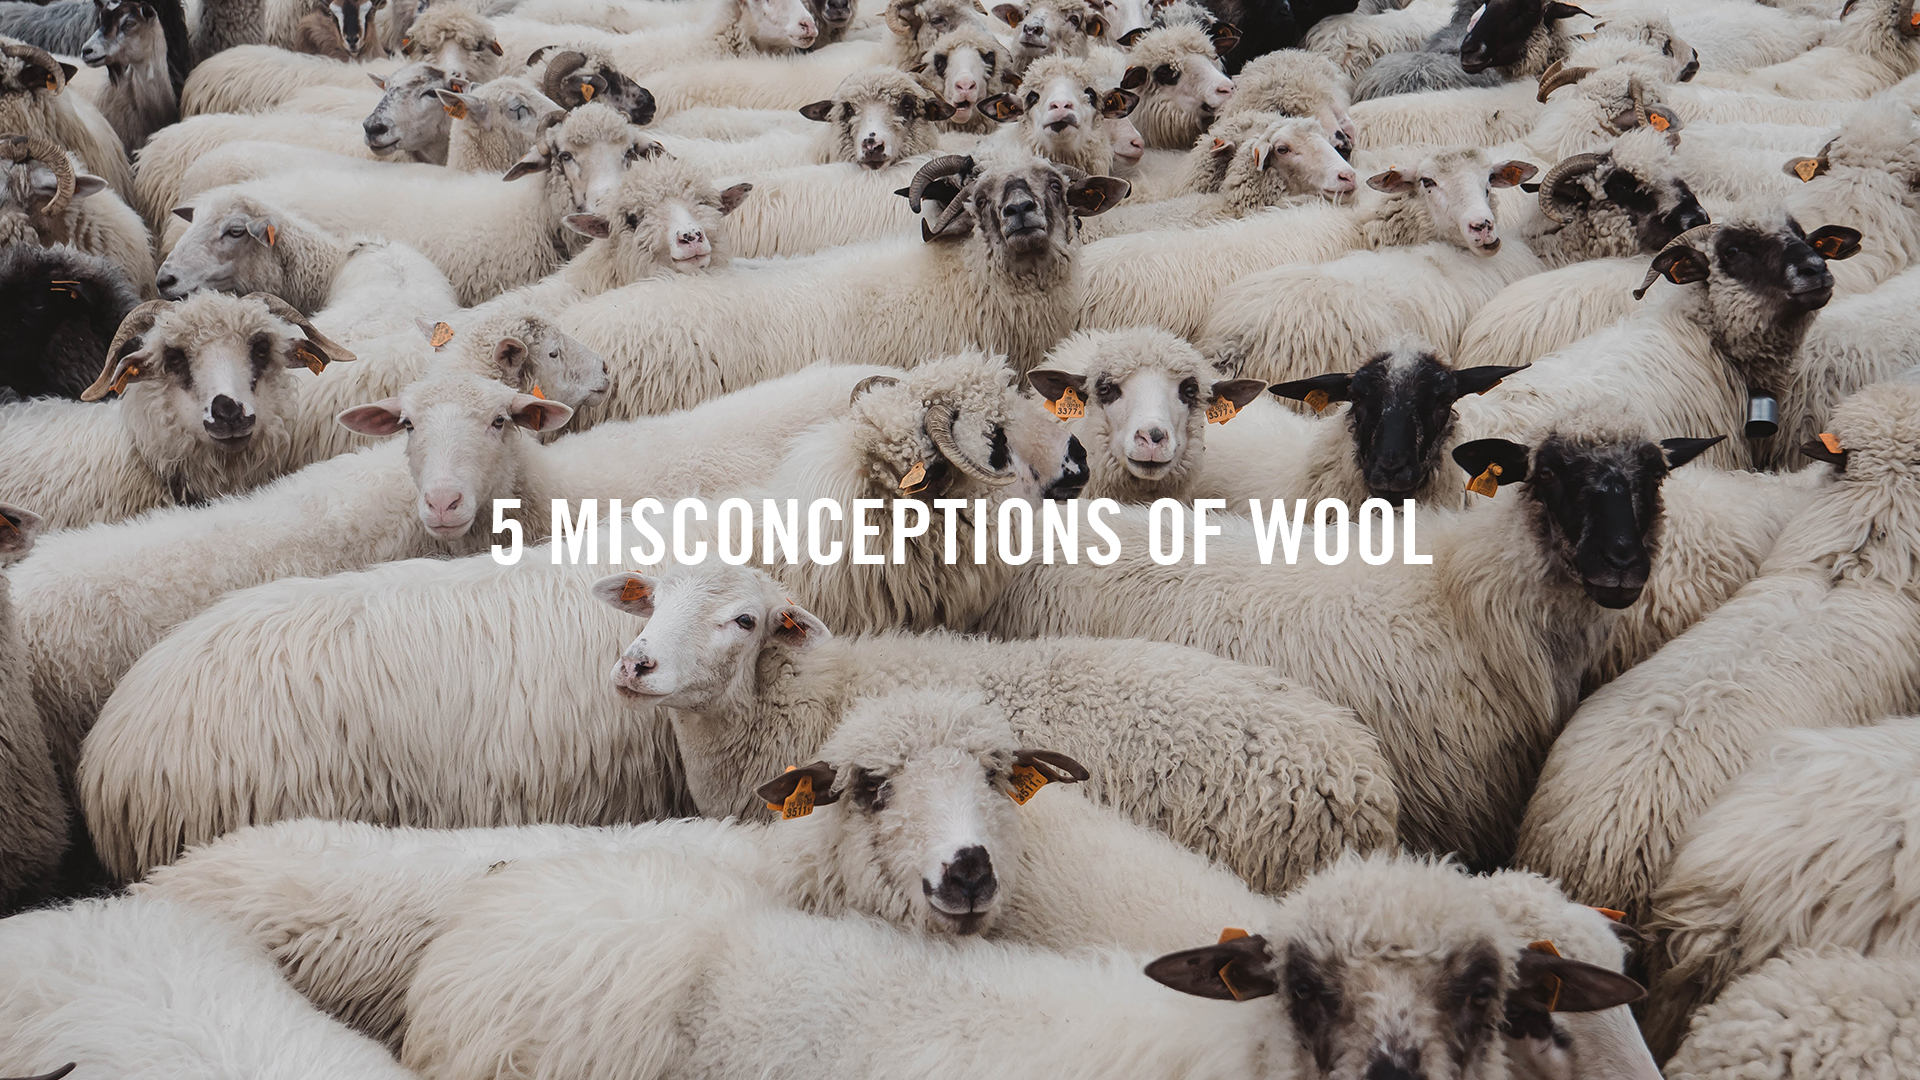 5 Misconceptions of Wool